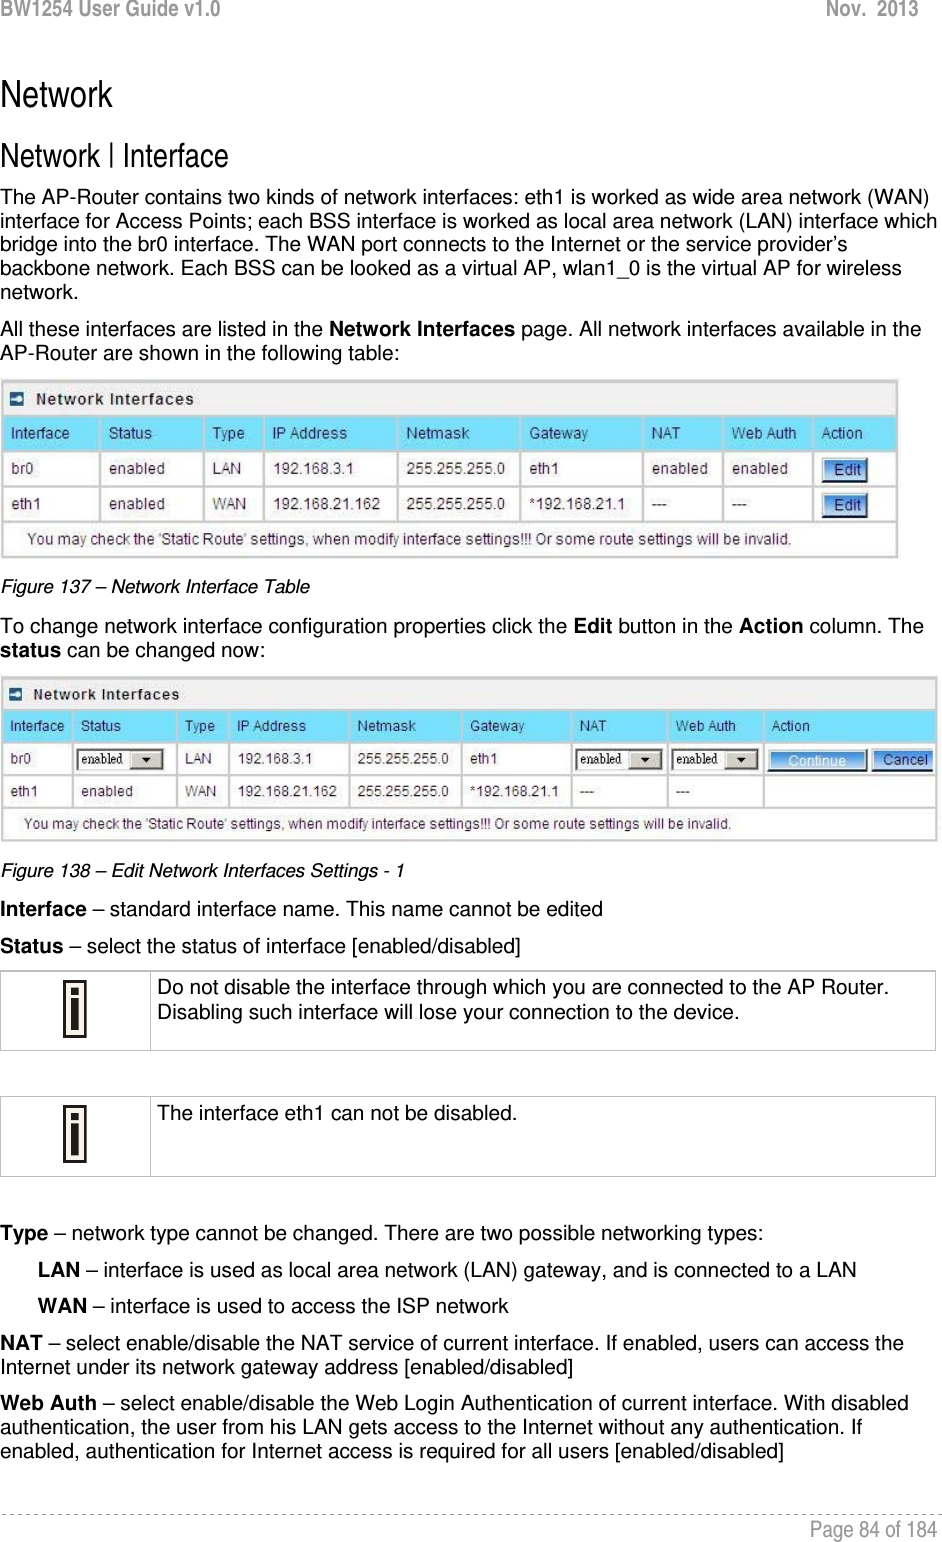 BW1254 User Guide v1.0  Nov.  2013     Page 84 of 184   Network Network | Interface  The AP-Router contains two kinds of network interfaces: eth1 is worked as wide area network (WAN) interface for Access Points; each BSS interface is worked as local area network (LAN) interface which bridge into the br0 interface. The WAN port connects to the Internet or the service provider’s backbone network. Each BSS can be looked as a virtual AP, wlan1_0 is the virtual AP for wireless network. All these interfaces are listed in the Network Interfaces page. All network interfaces available in the AP-Router are shown in the following table:  Figure 137 – Network Interface Table To change network interface configuration properties click the Edit button in the Action column. The status can be changed now:  Figure 138 – Edit Network Interfaces Settings - 1 Interface – standard interface name. This name cannot be edited Status – select the status of interface [enabled/disabled]  Do not disable the interface through which you are connected to the AP Router. Disabling such interface will lose your connection to the device.   The interface eth1 can not be disabled.  Type – network type cannot be changed. There are two possible networking types: LAN – interface is used as local area network (LAN) gateway, and is connected to a LAN WAN – interface is used to access the ISP network NAT – select enable/disable the NAT service of current interface. If enabled, users can access the Internet under its network gateway address [enabled/disabled] Web Auth – select enable/disable the Web Login Authentication of current interface. With disabled authentication, the user from his LAN gets access to the Internet without any authentication. If enabled, authentication for Internet access is required for all users [enabled/disabled]  